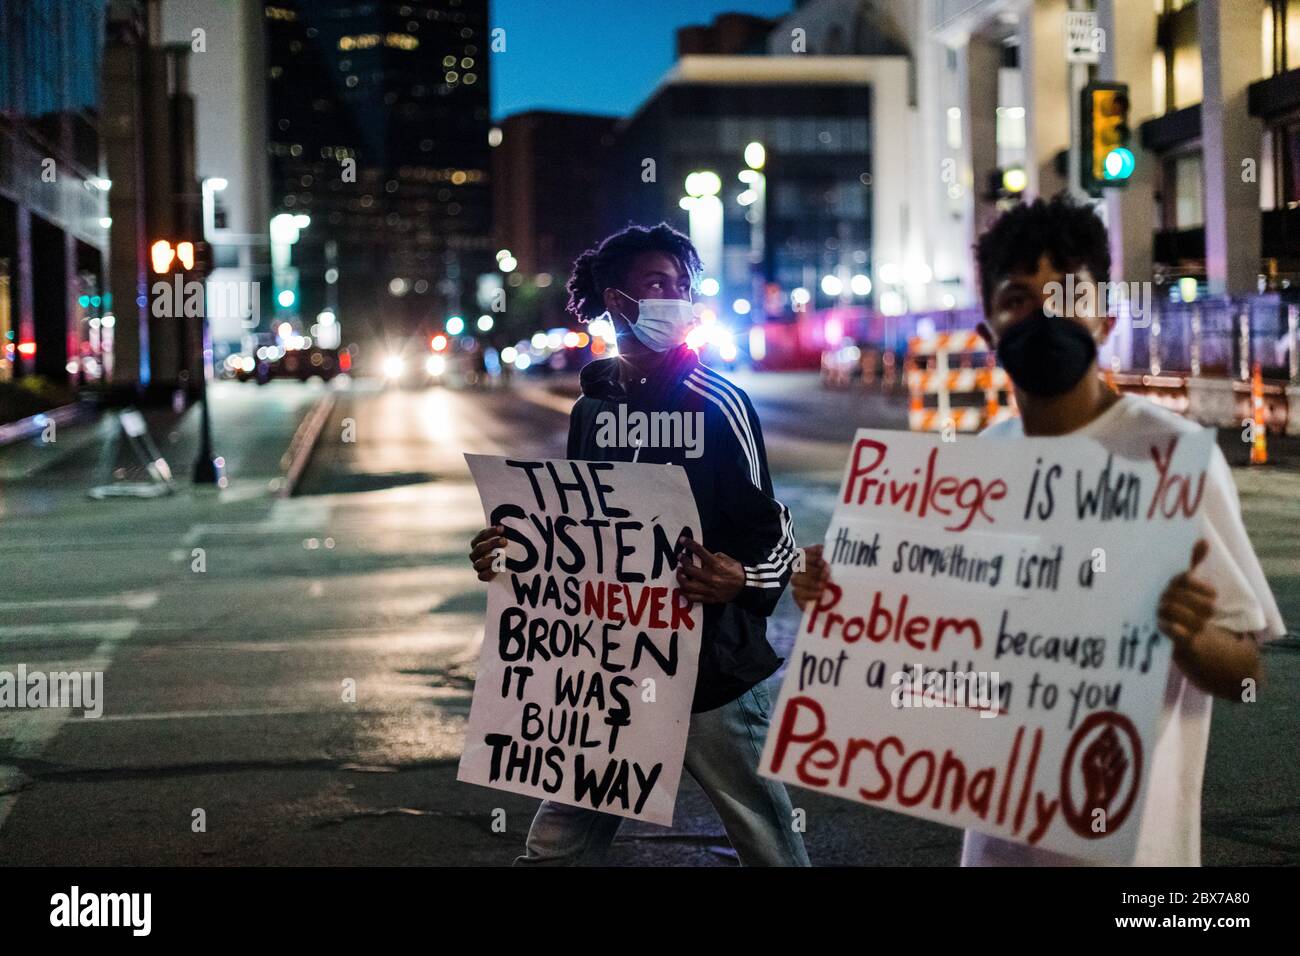 Dallas, Texas / United States - May 30 2020: Protestors march through streets of Dallas to protest the death of George Floyd. Stock Photo